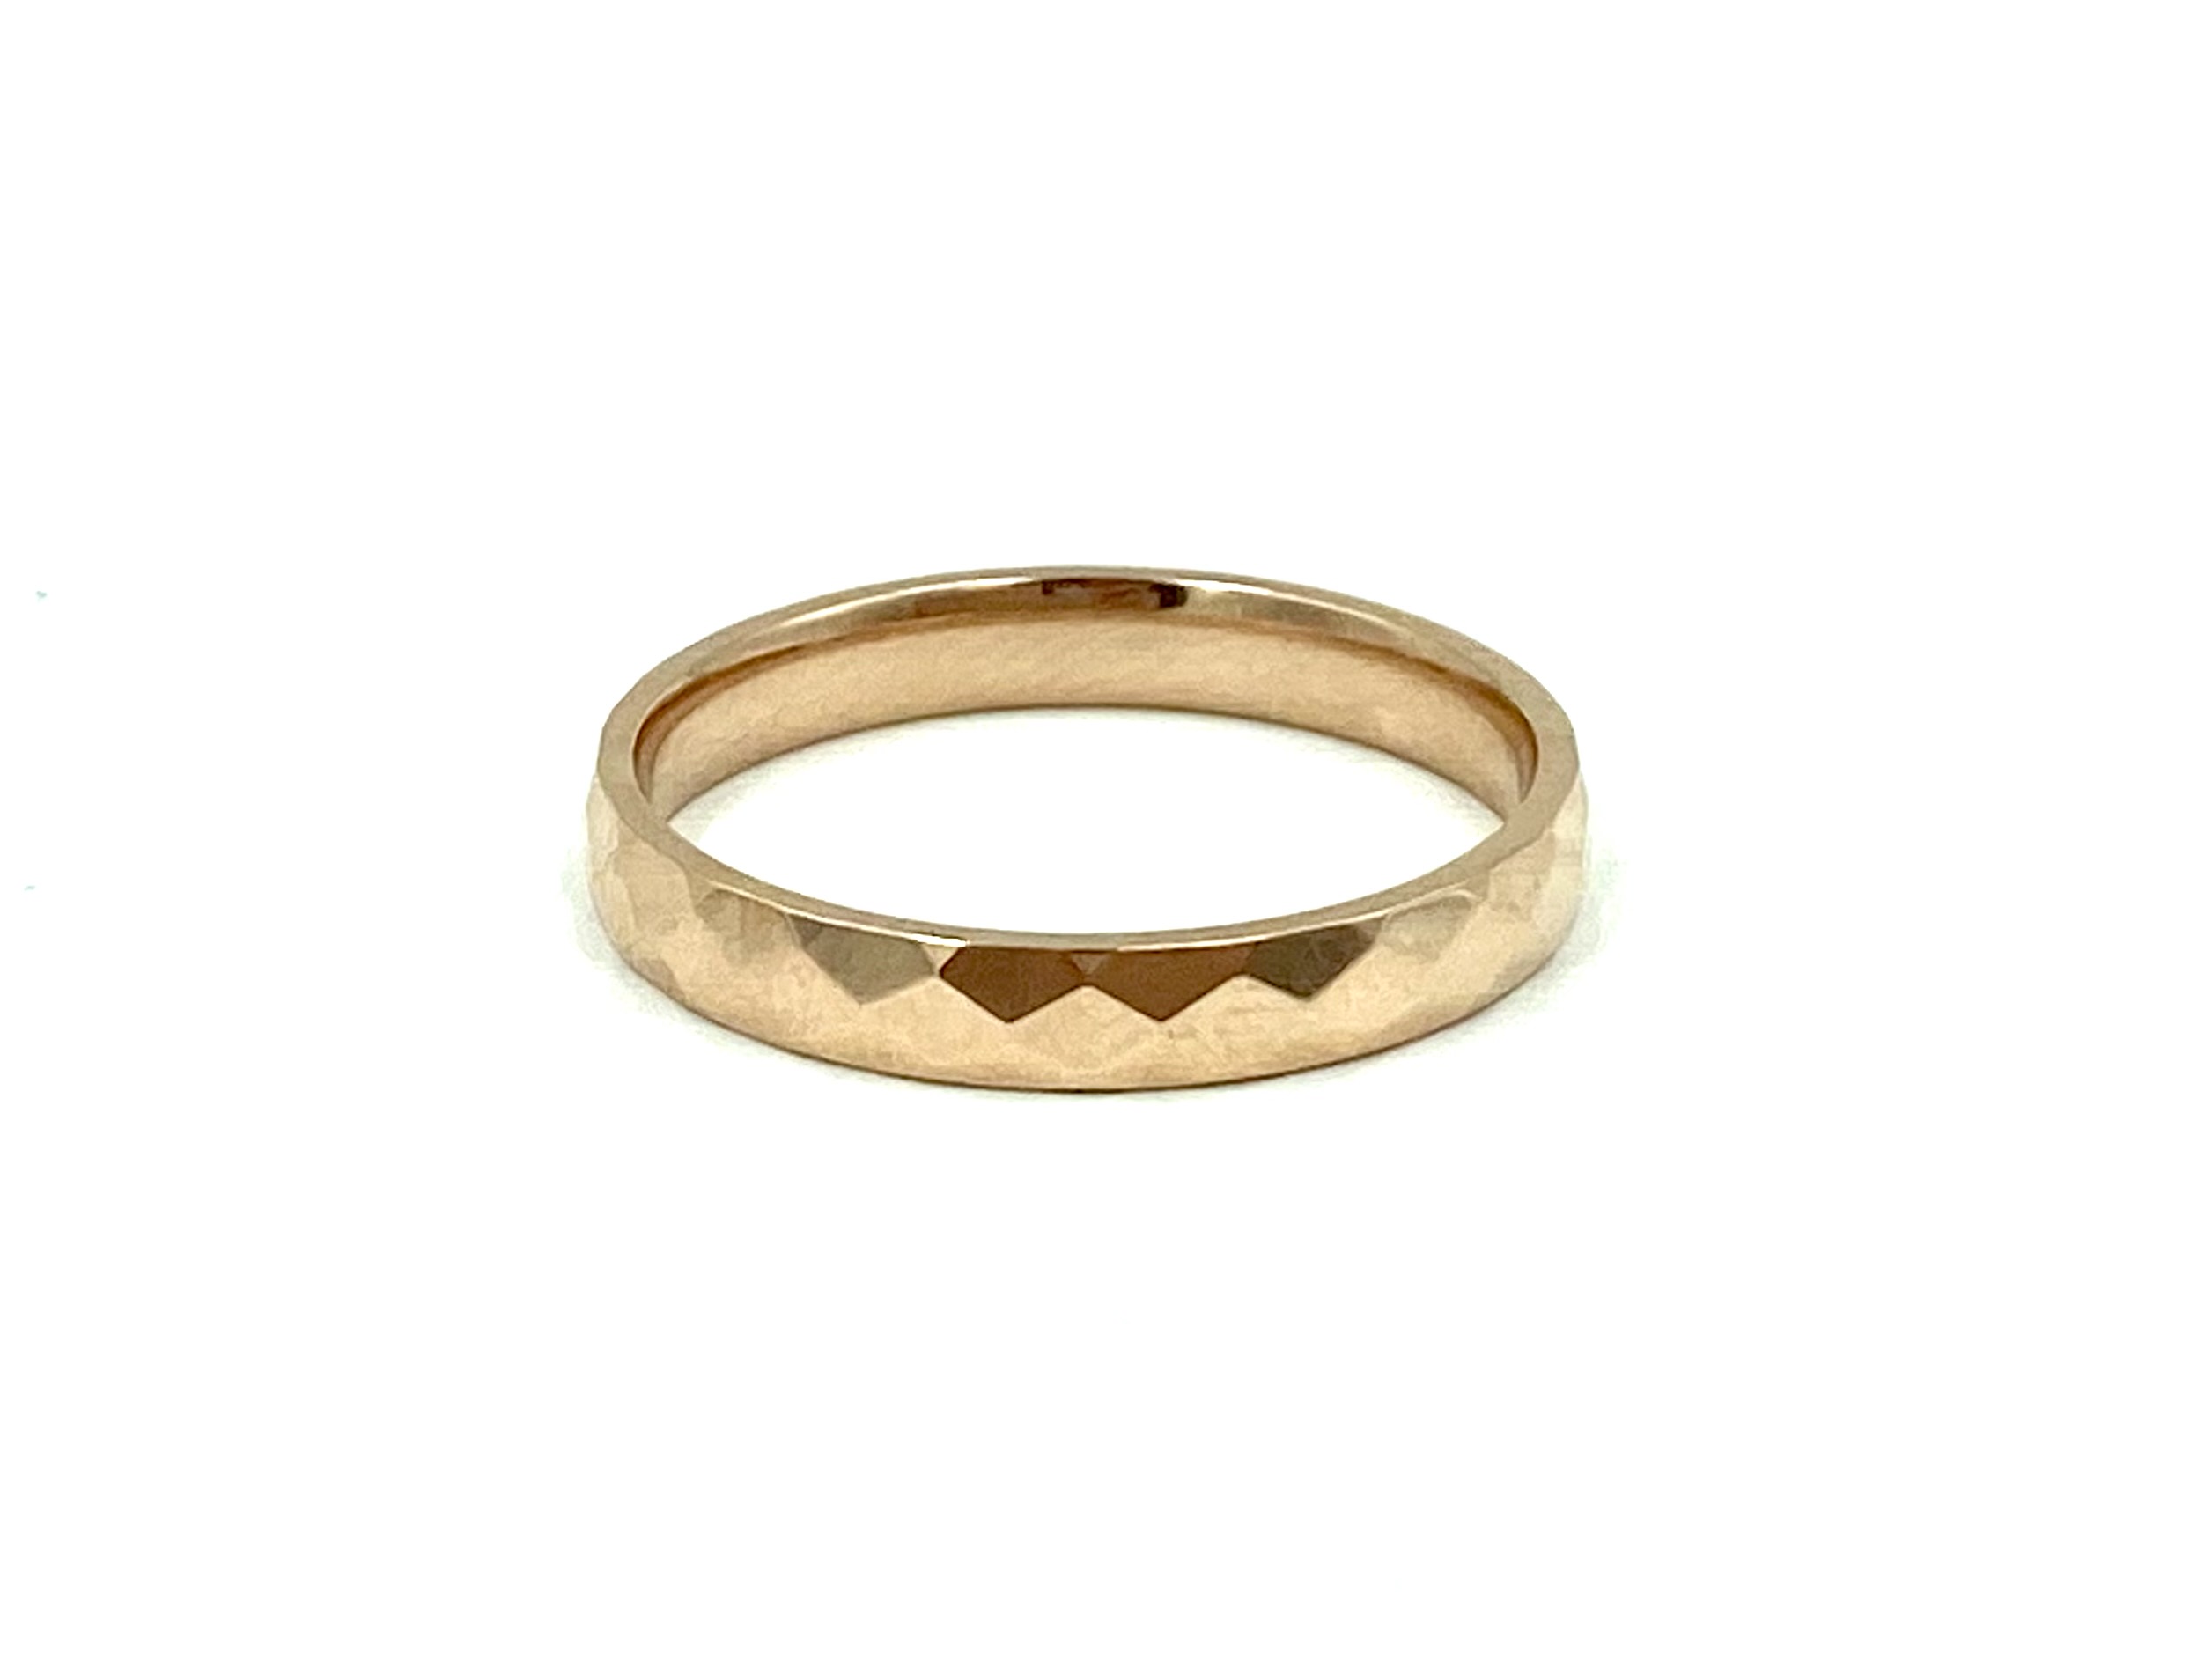 9ct Rose Gold Stackable